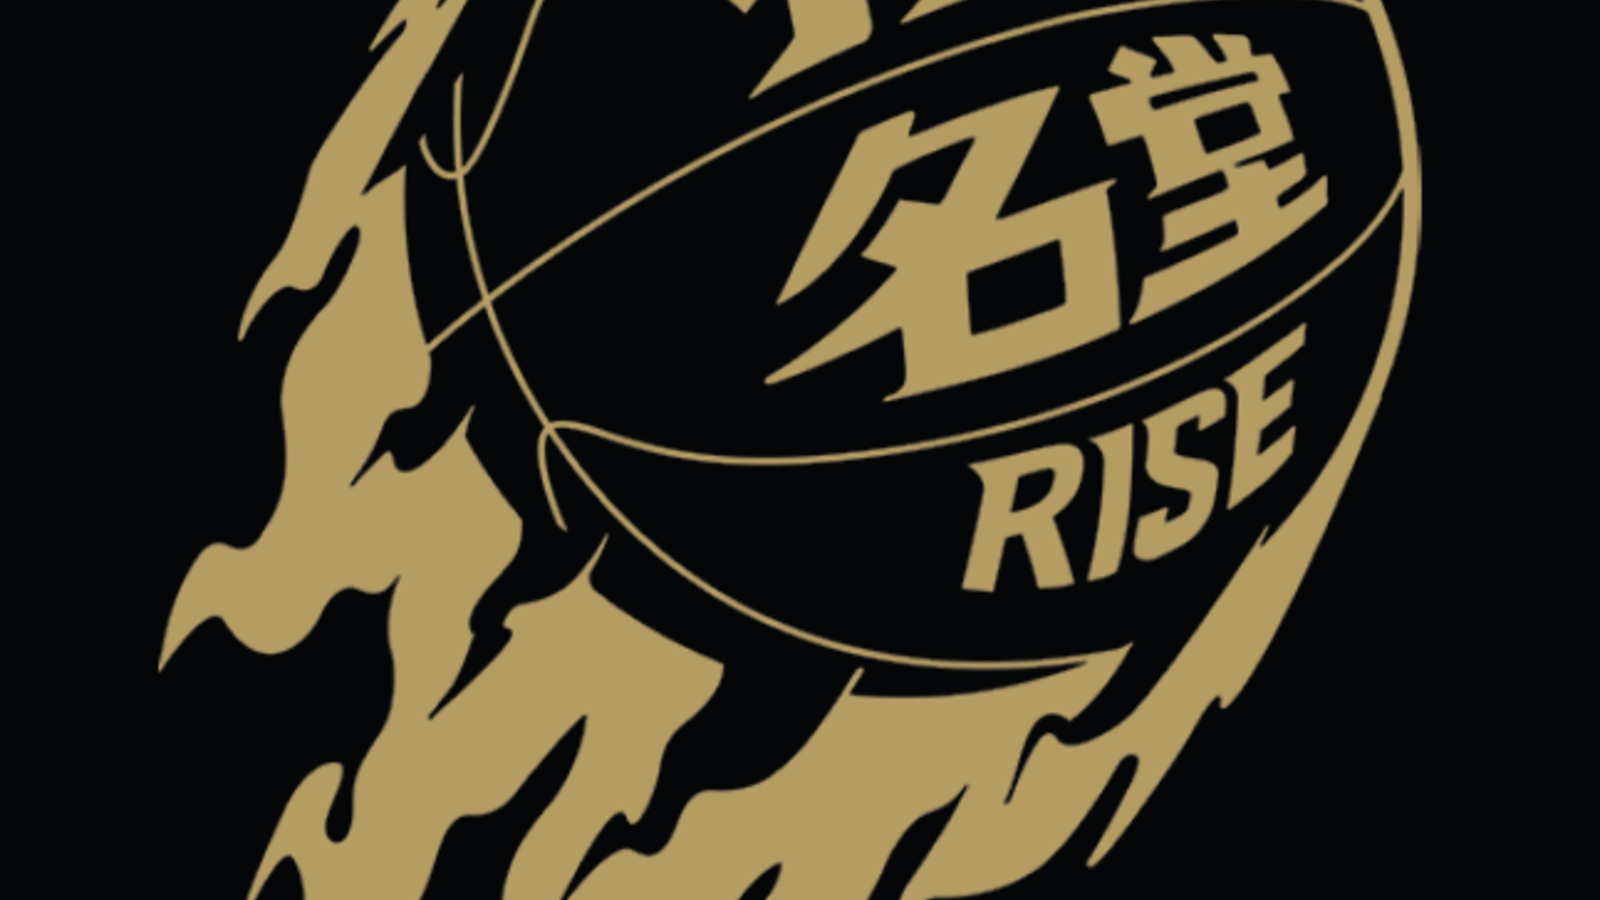 Nike Basketball Logo - NIKE RISE BASKETBALL CAMPAIGN GETS UNDERWAY IN CHINA